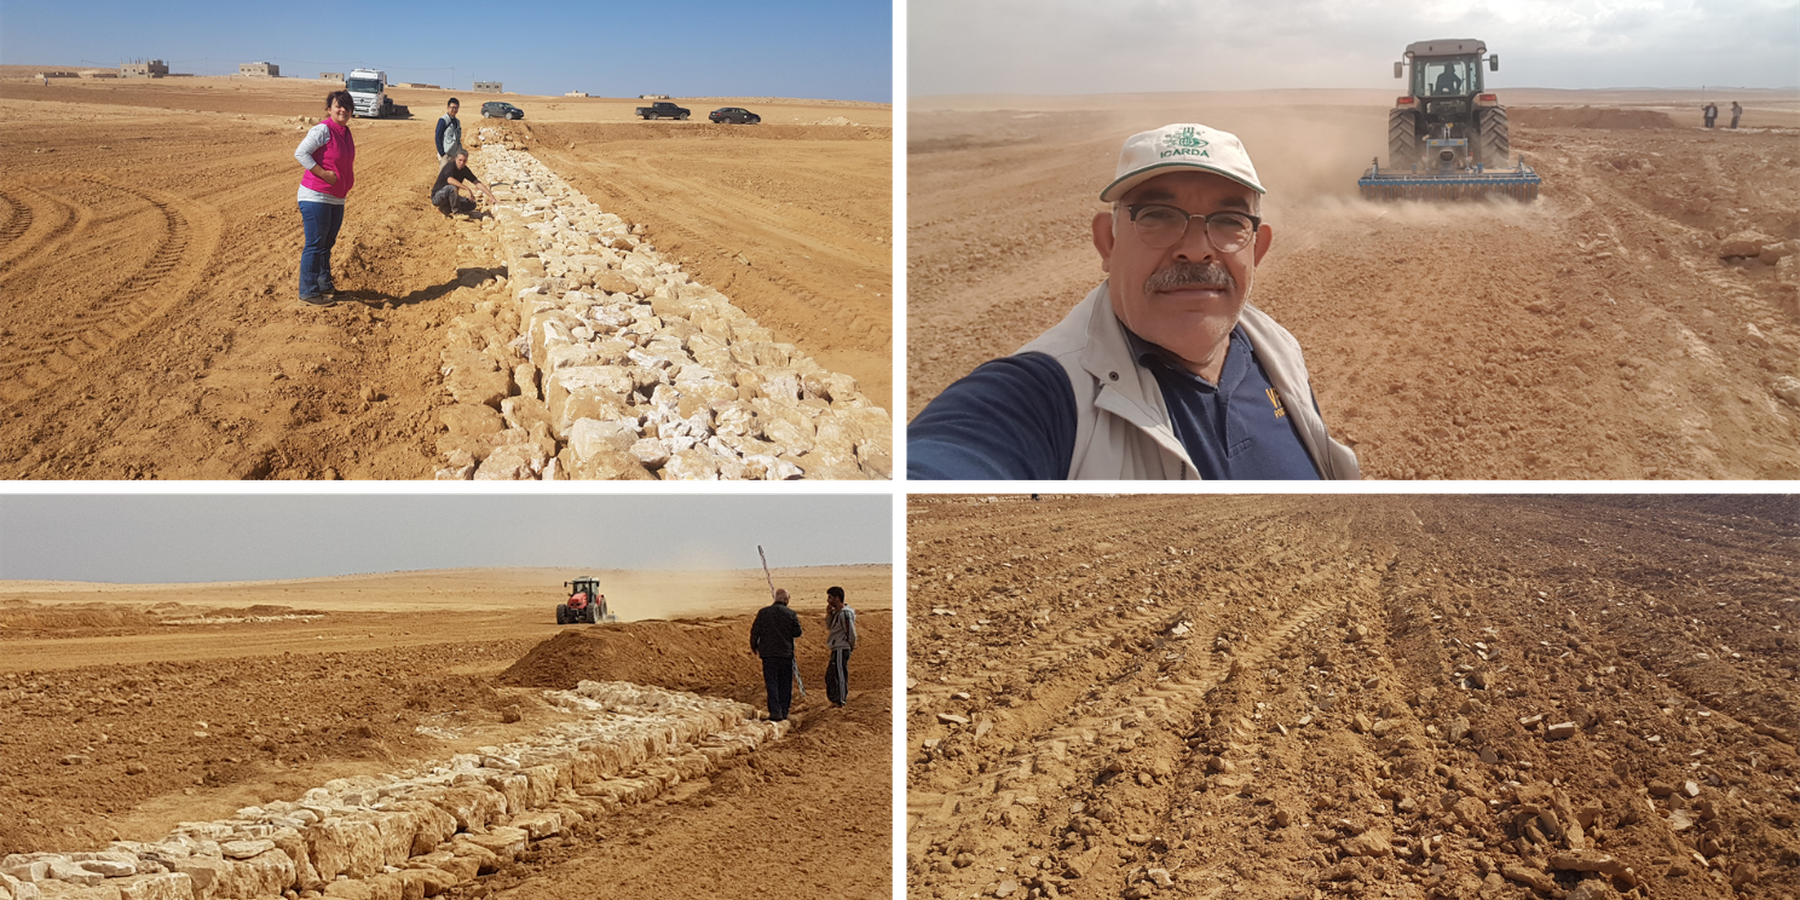 Seedbed preparation and spillways construction. Top Left: The construction of the stone dikes. Top Right: Soil leveling of the fields for improved water infiltration. Bottom Left: Local community workers inspecting the dike. Bottom Right: A well prepared seedbed after leveling.